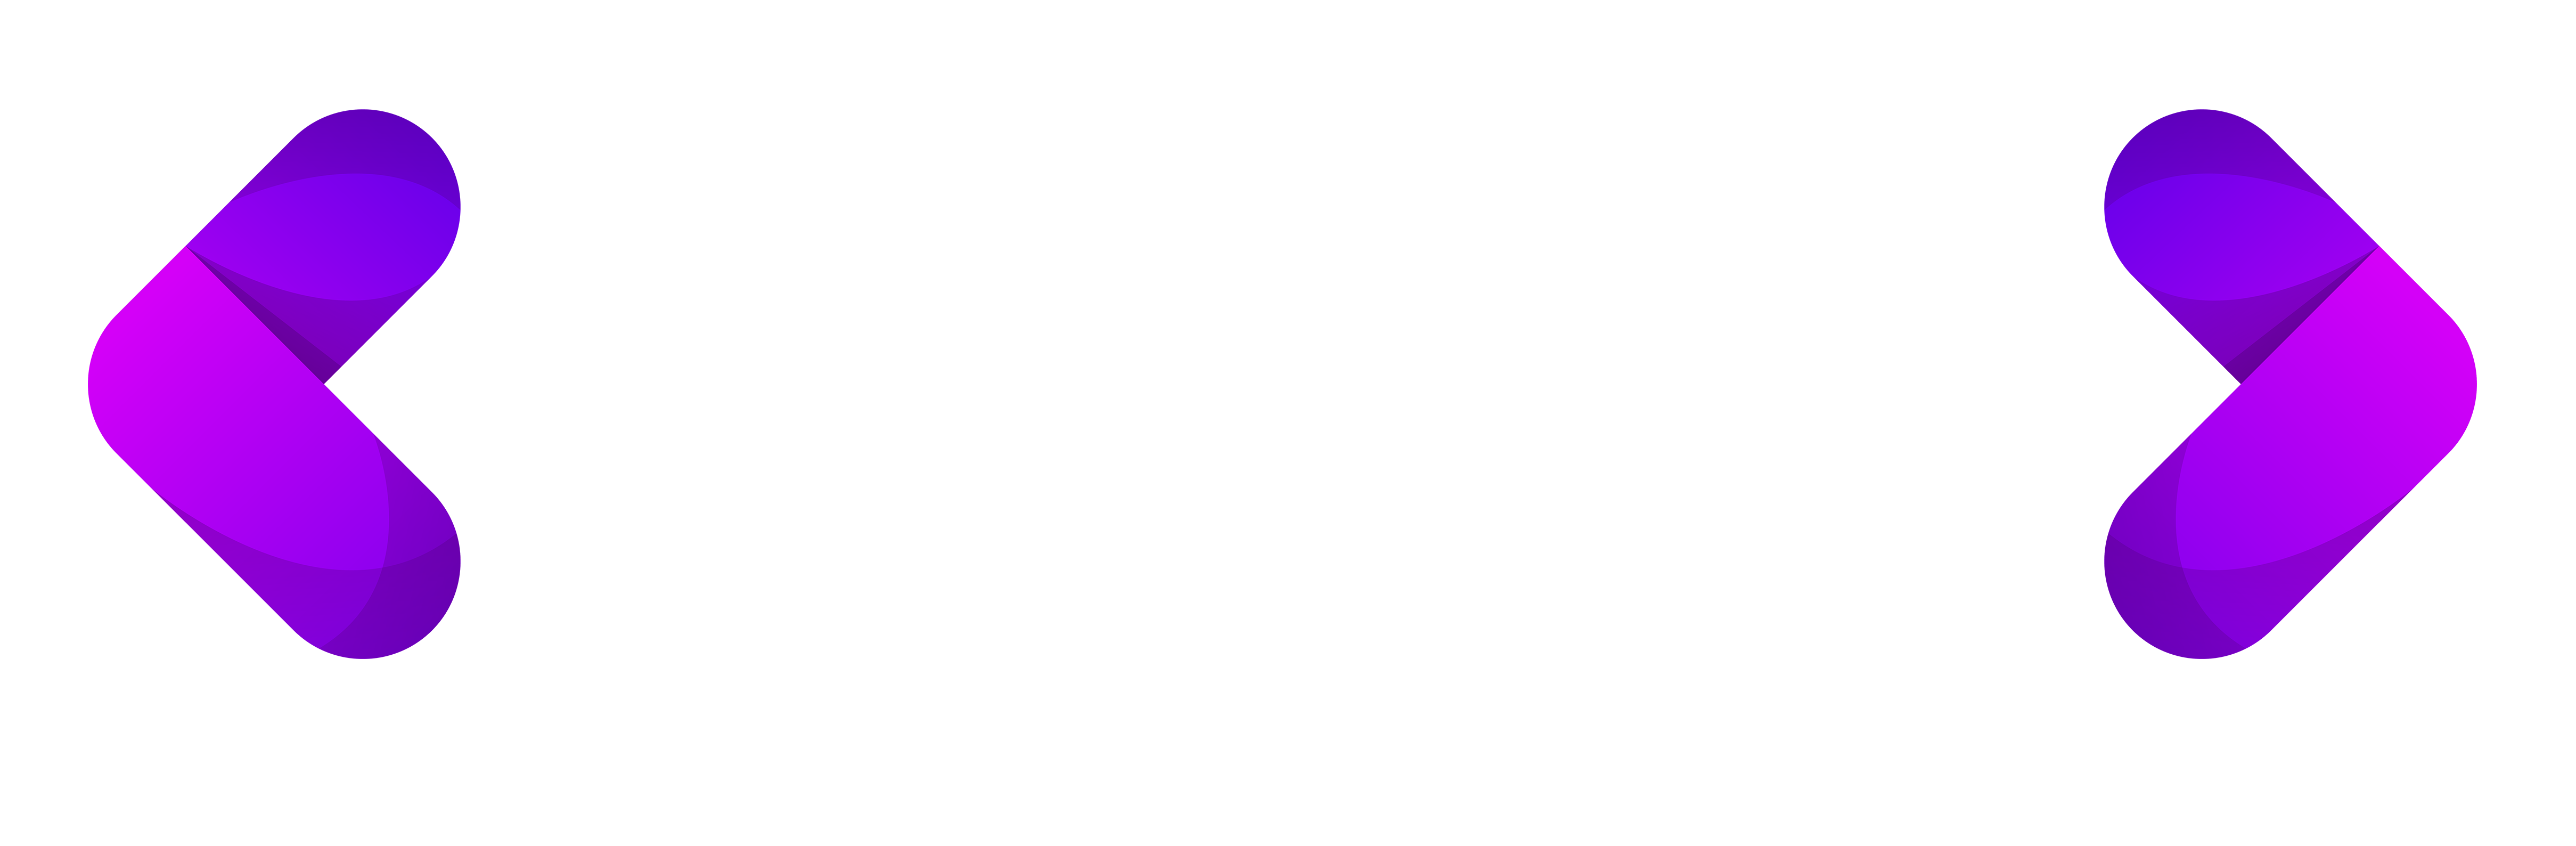 Byoo - Quintessentially You!